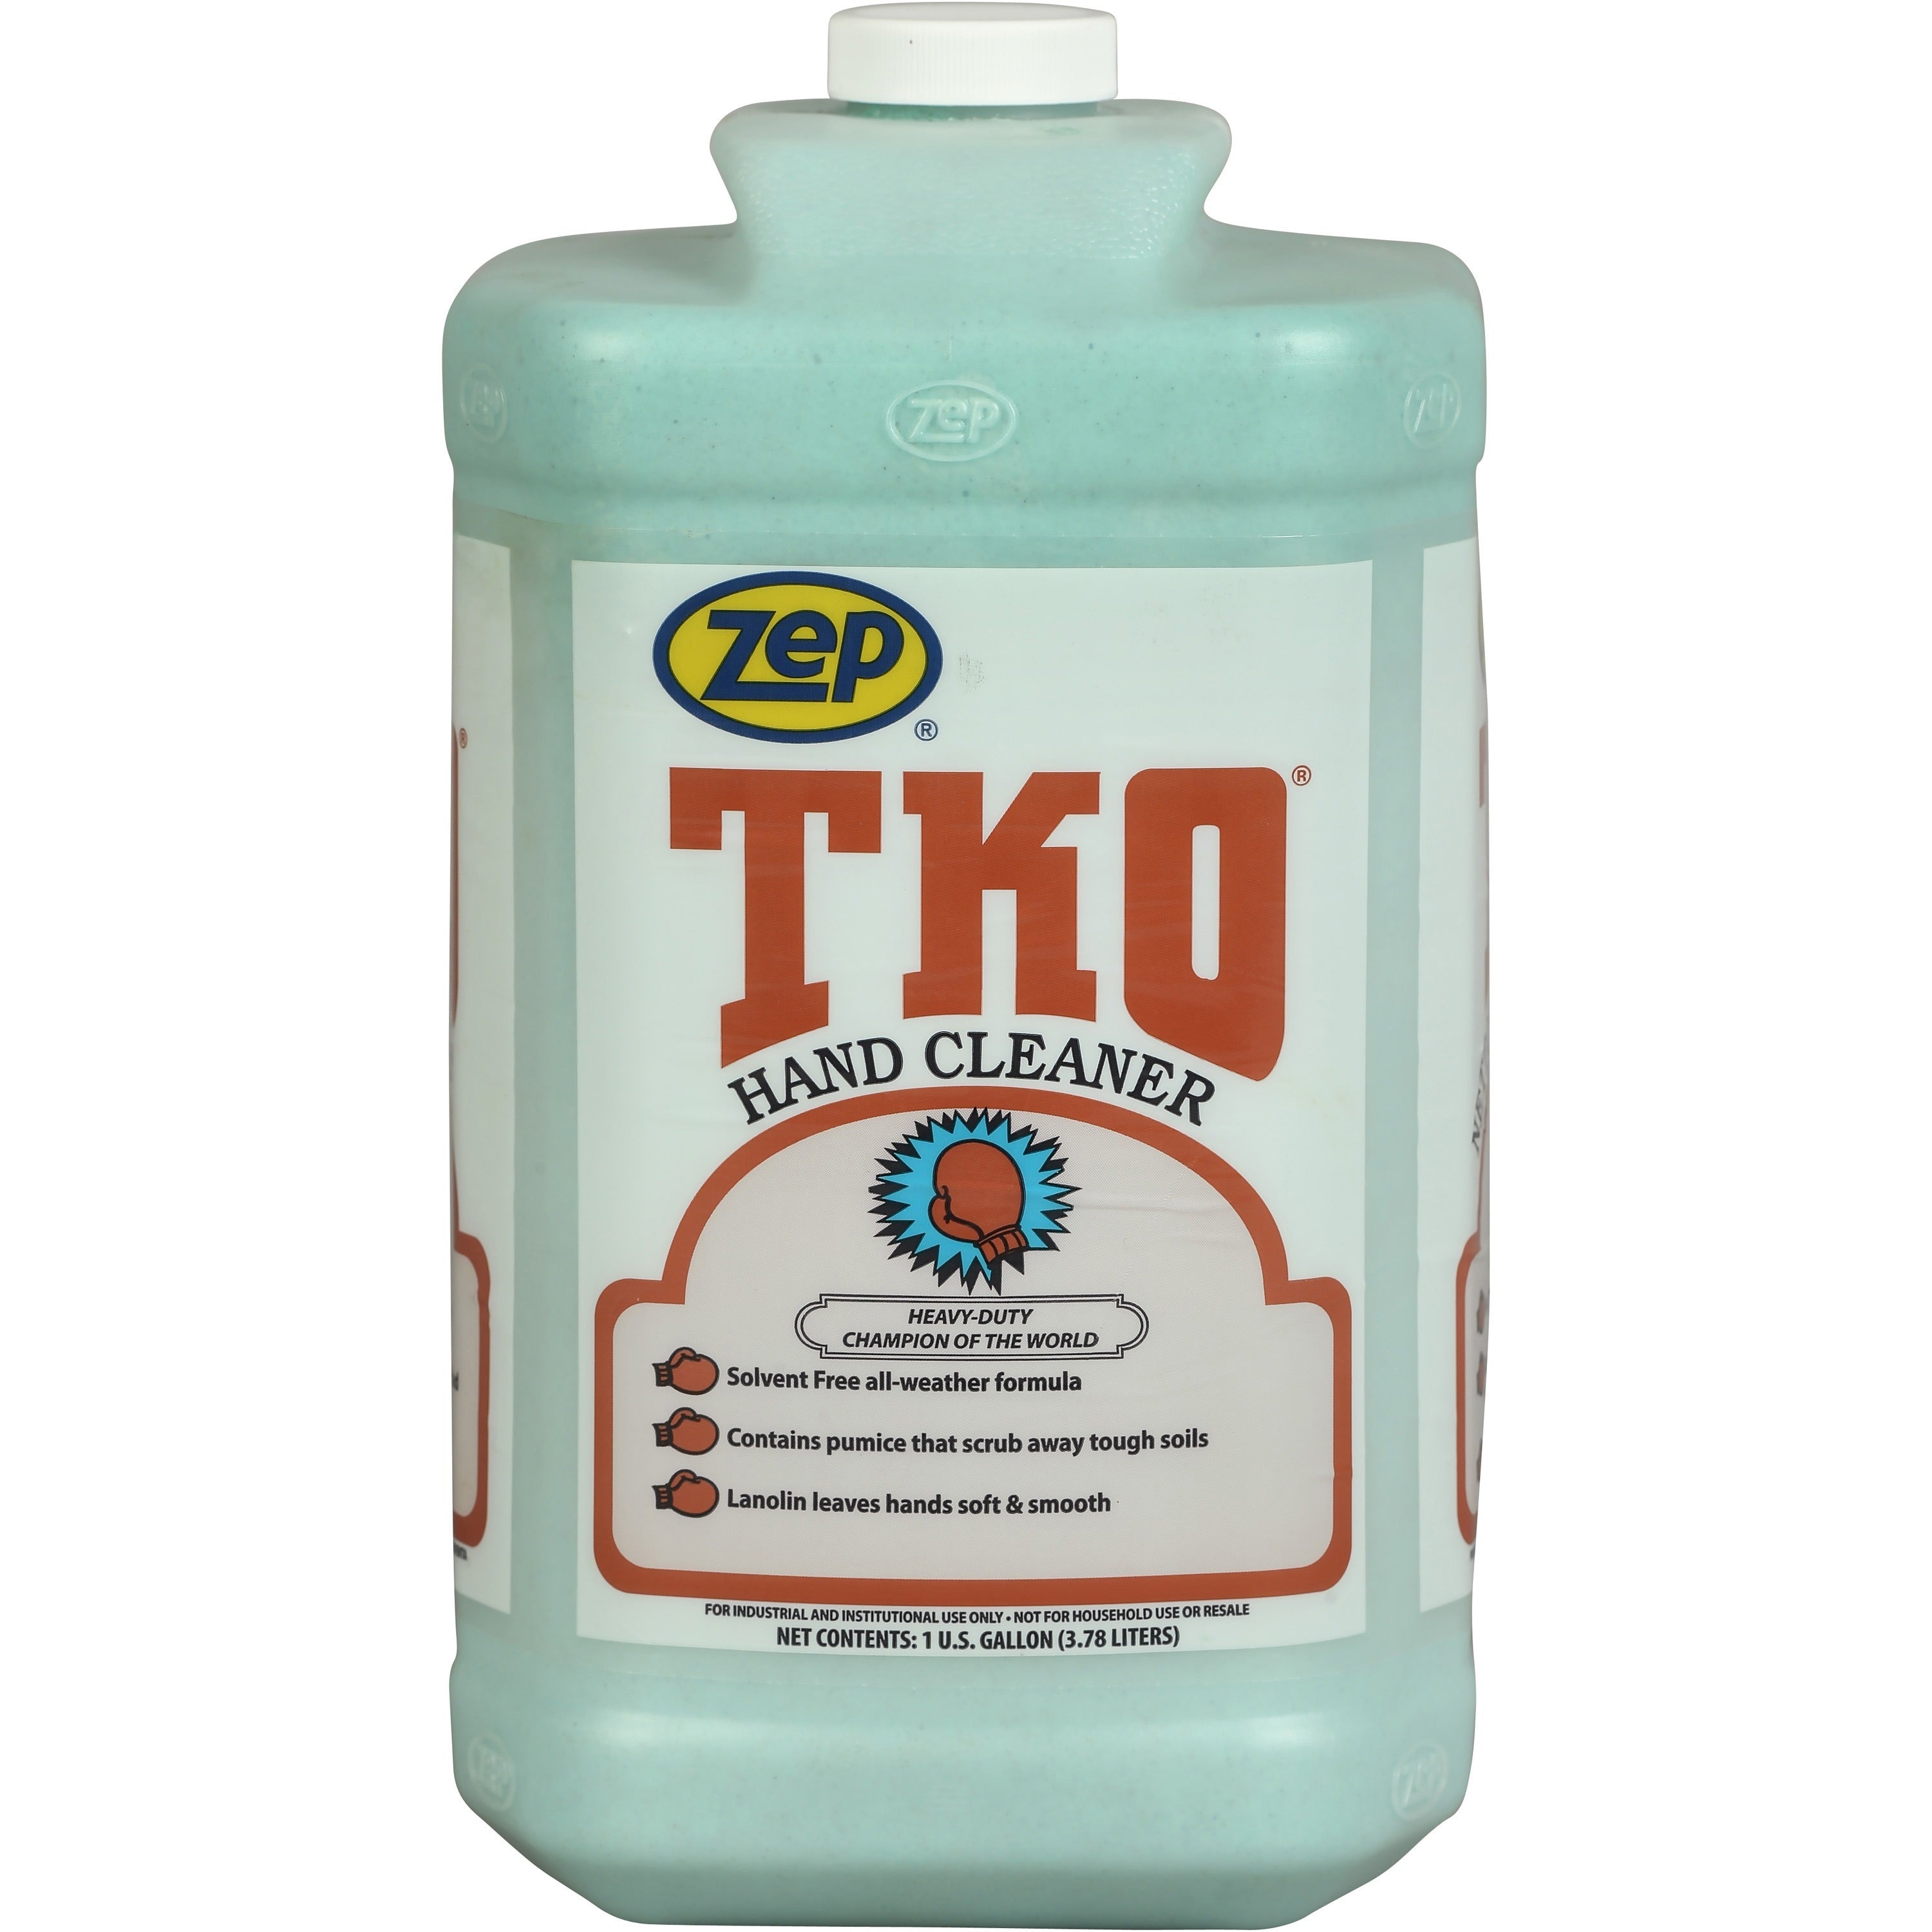 zep-tko-hand-cleaner-lemon-lime-scentfor-1-gal-38-l-dirt-remover-grime-remover-grease-remover-hand-blue-opaque-solvent-free-heavy-duty-non-flammable-4-carton_zper54824ct - 2